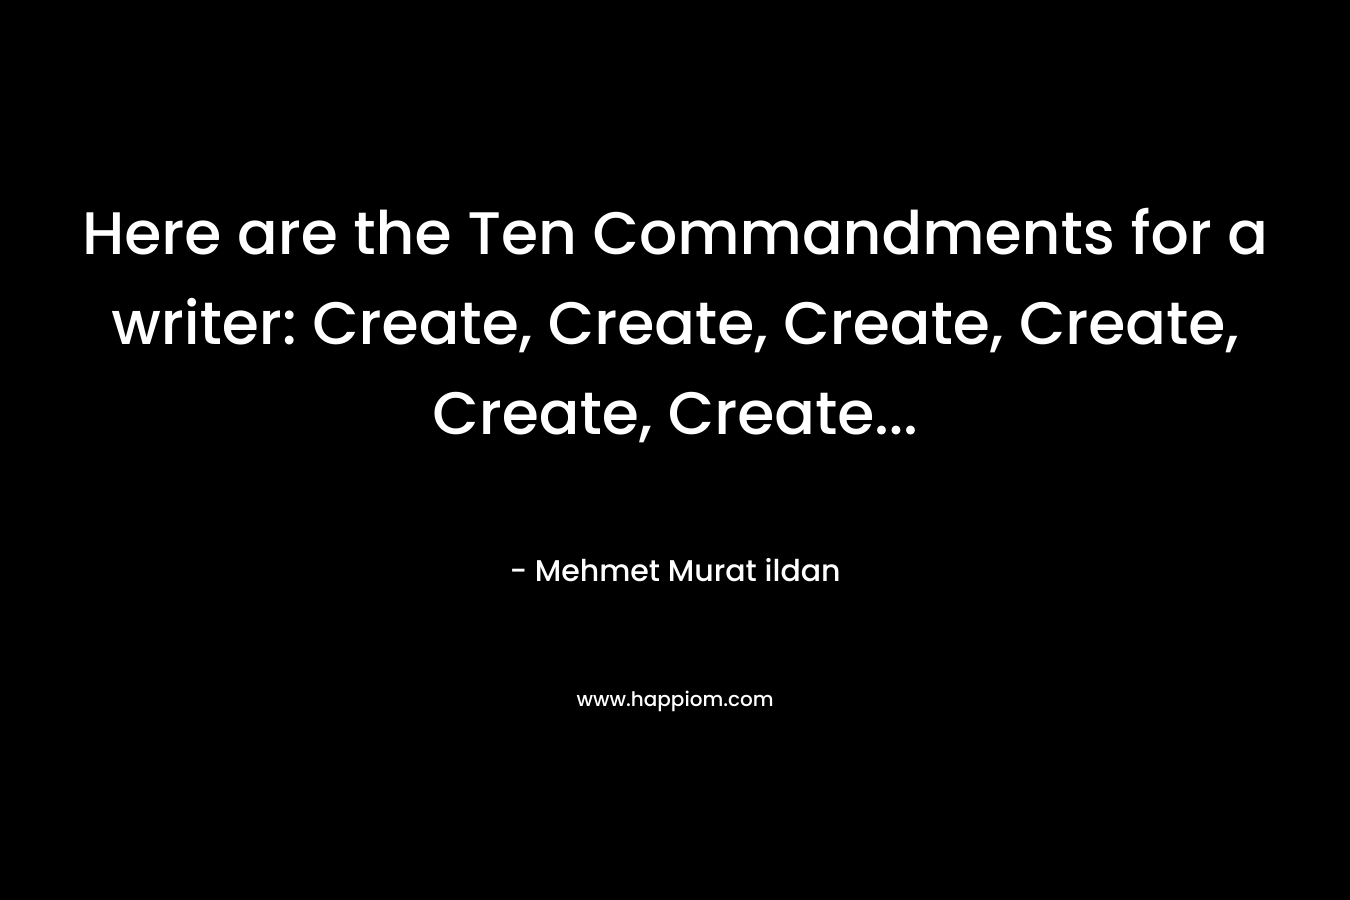 Here are the Ten Commandments for a writer: Create, Create, Create, Create, Create, Create...